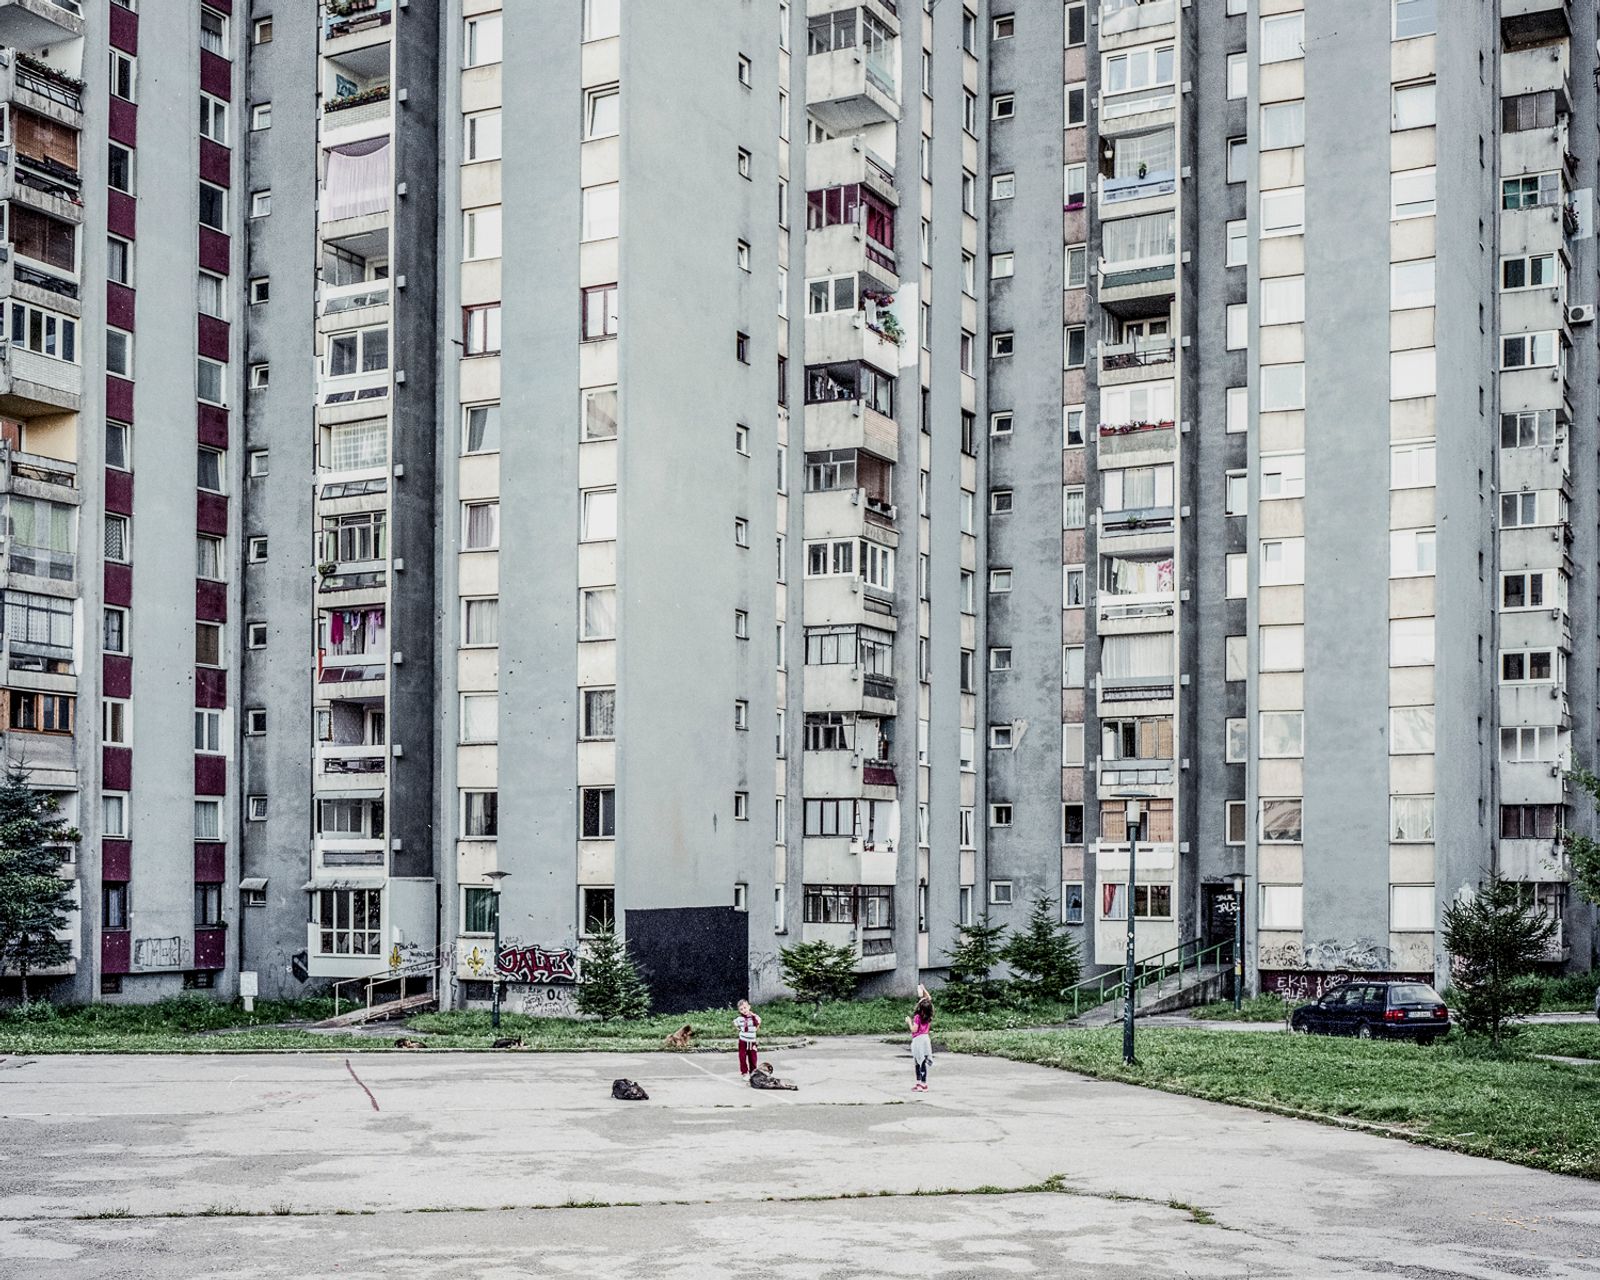 © Paweł Starzec - Image from the Makeshift photography project